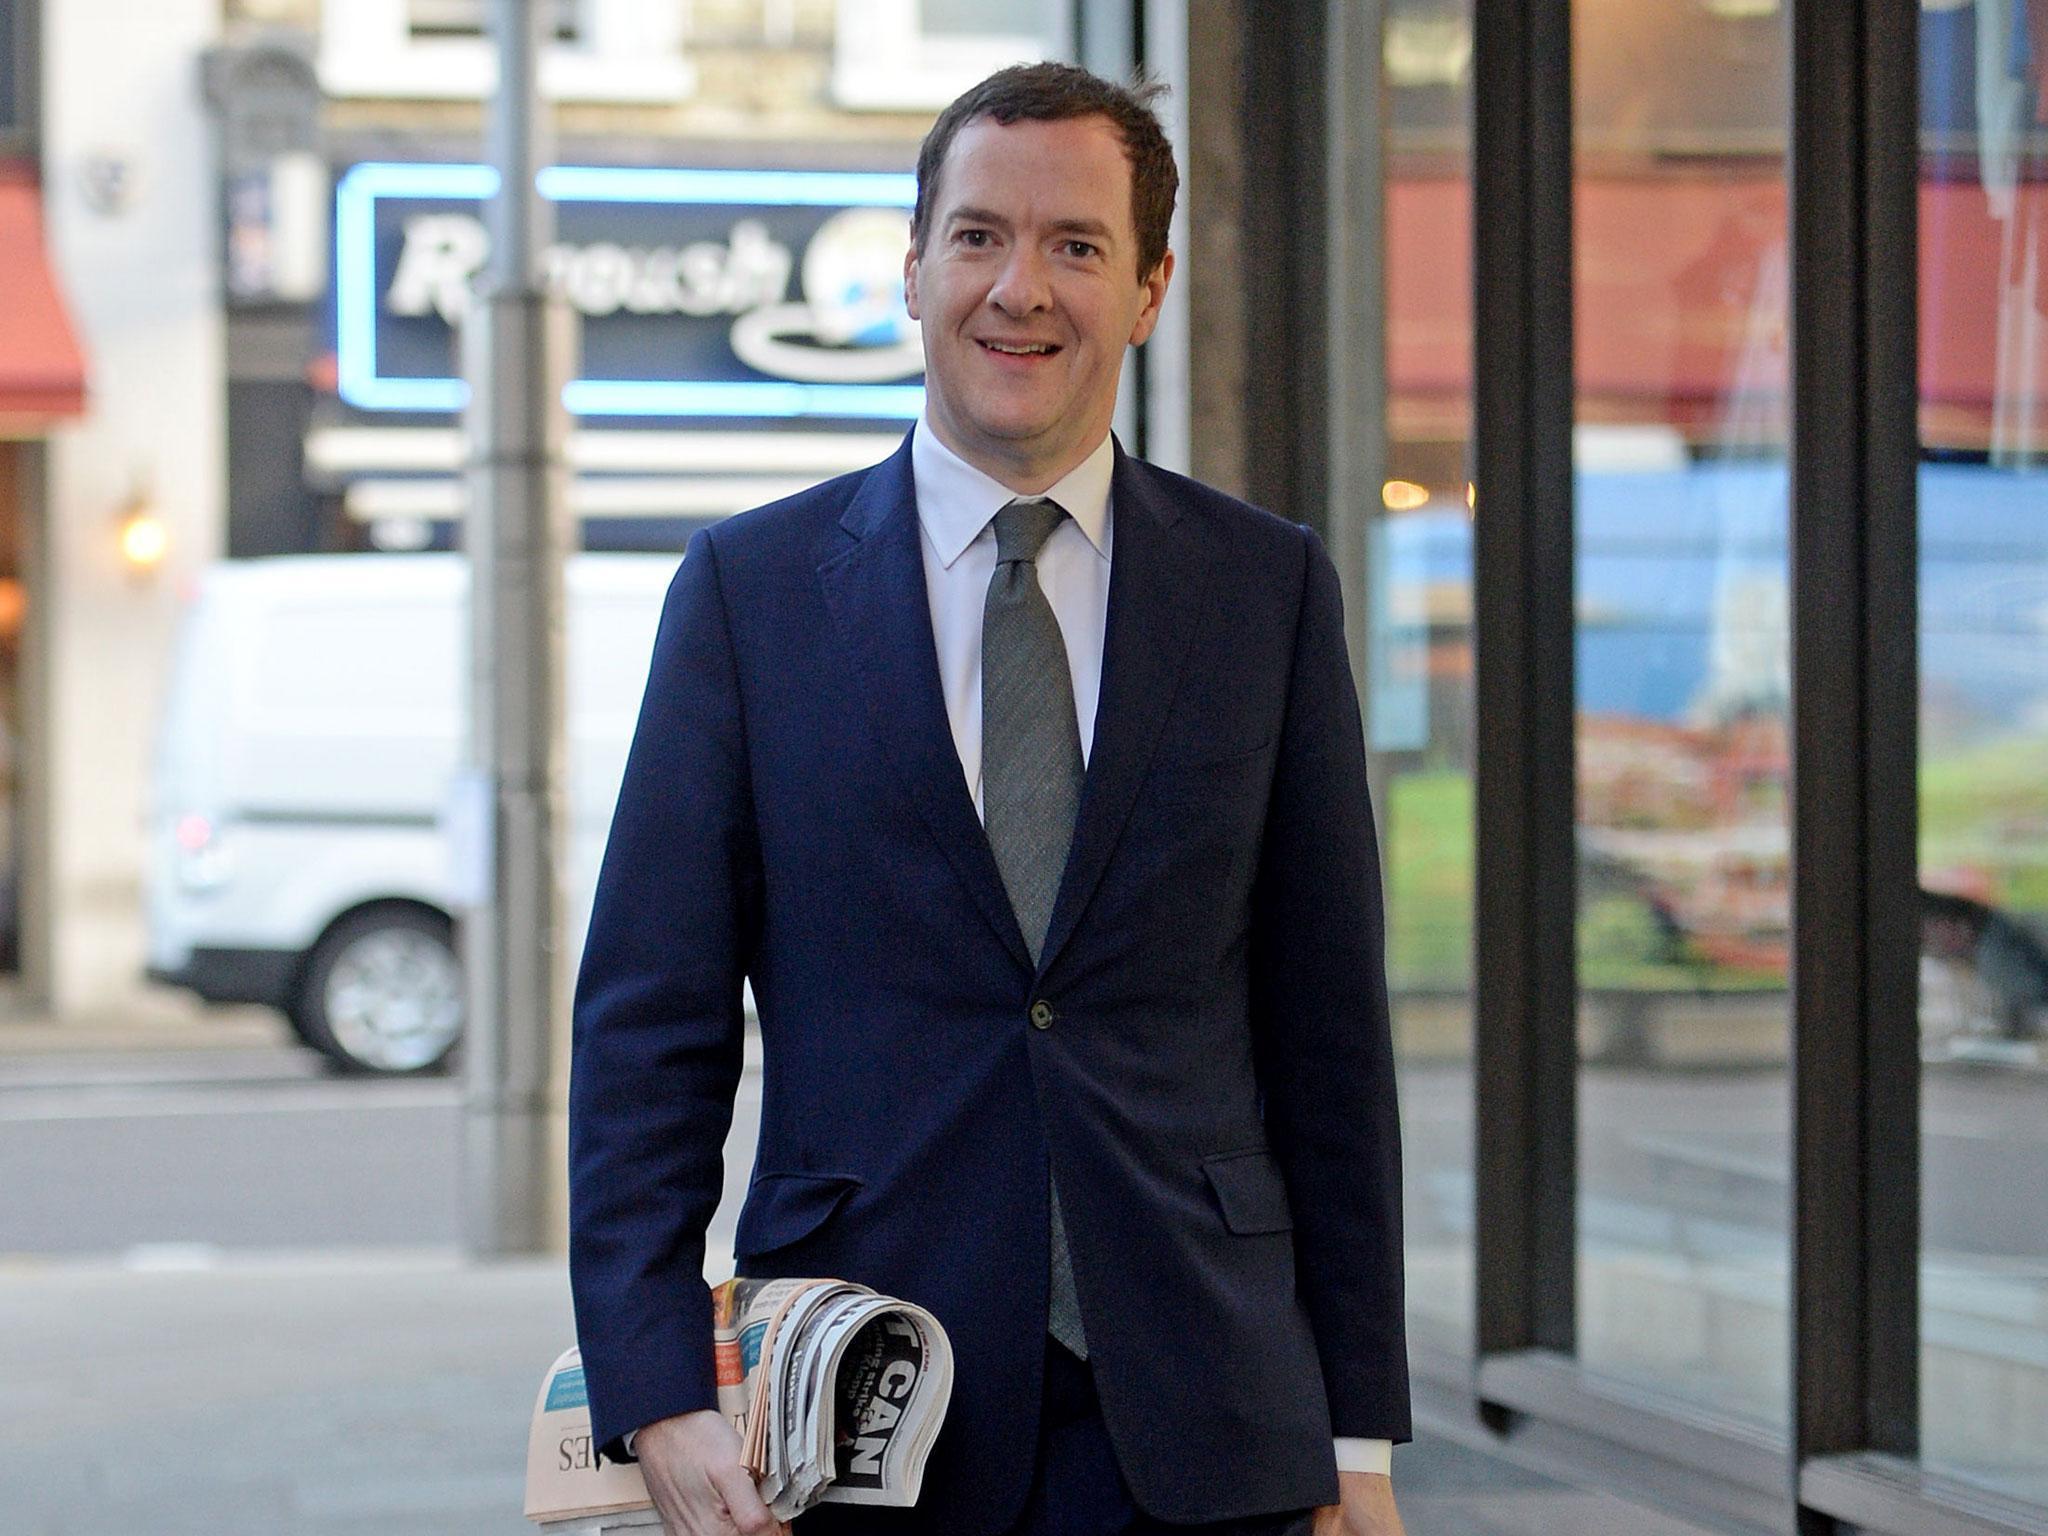 Osborne, having departed the Commons for a life in journalism, has retained his enthusiasm for the Northern Powerhouse